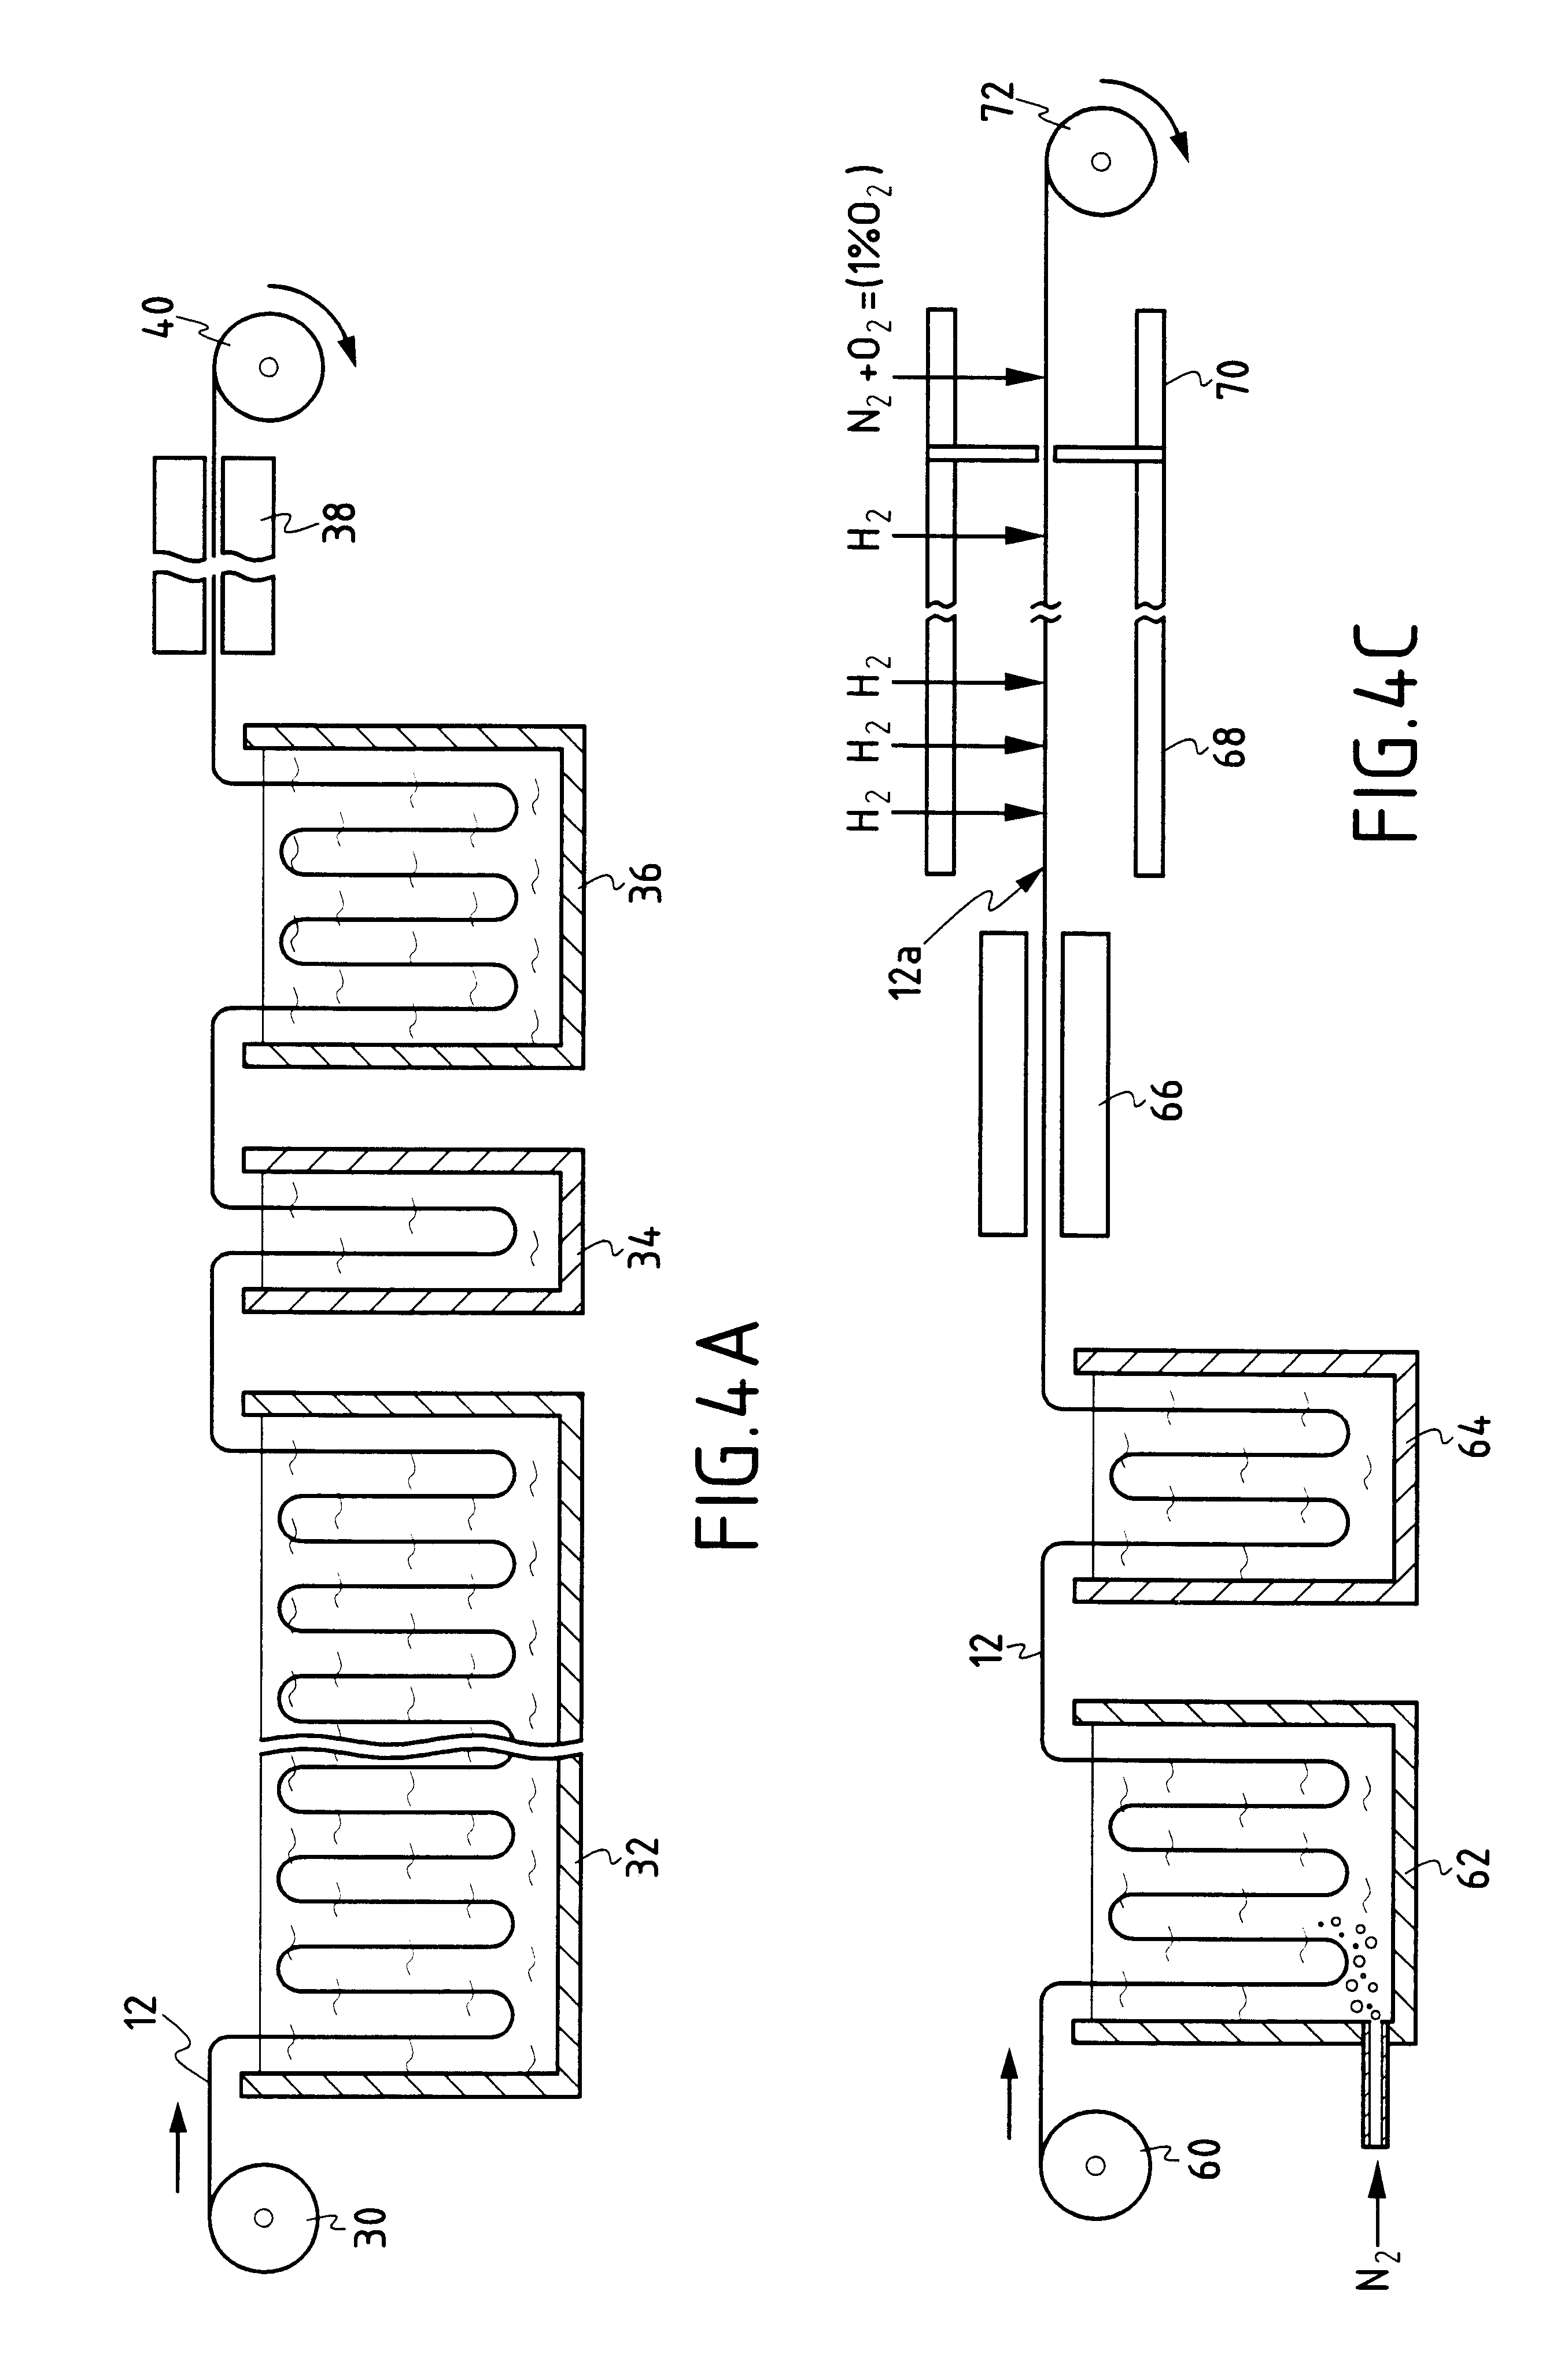 Gas diffusion electrode and application to catalyzed electrochemical processes